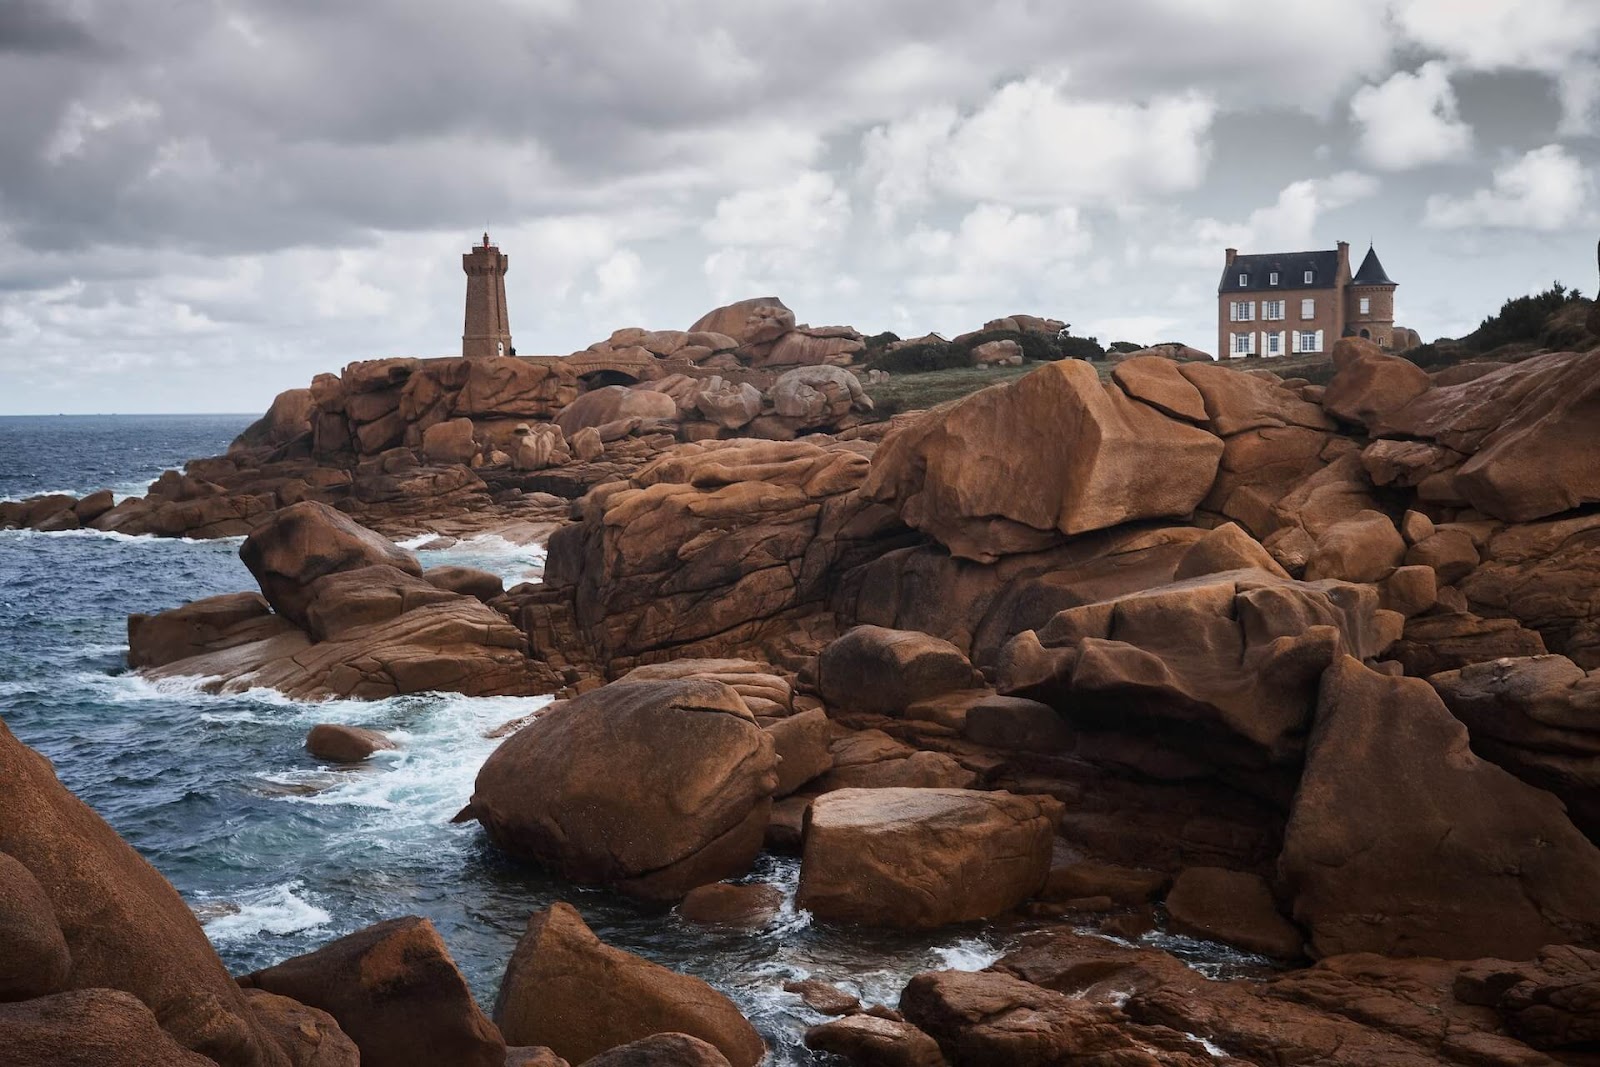 The Ploumanac'h Lighthouse in Perros-Guirec, France, on an overcast day.